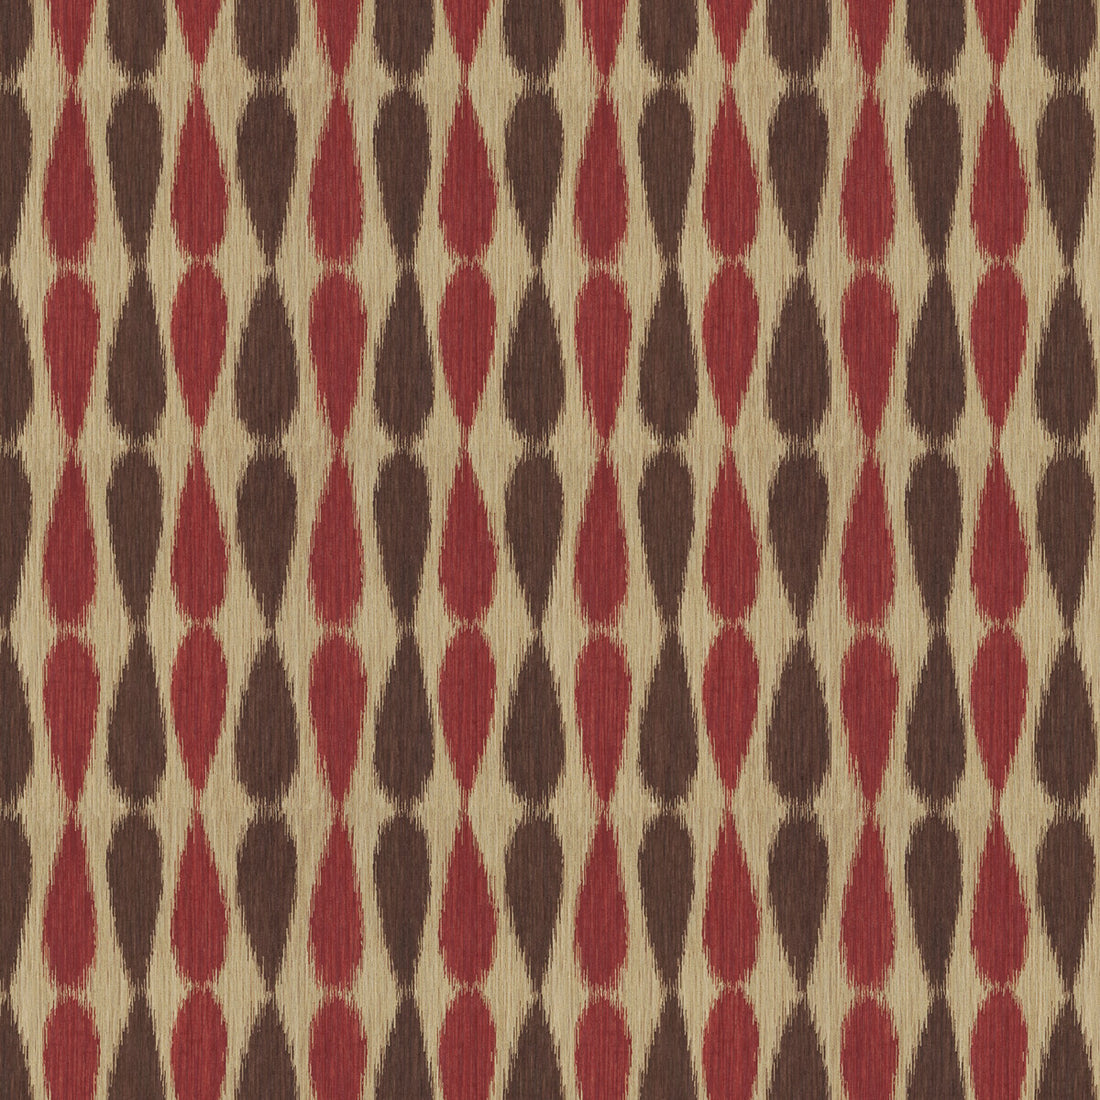 Ikat Drops fabric in red color - pattern GWF-2927.910.0 - by Lee Jofa Modern in the Allegra Hicks II collection